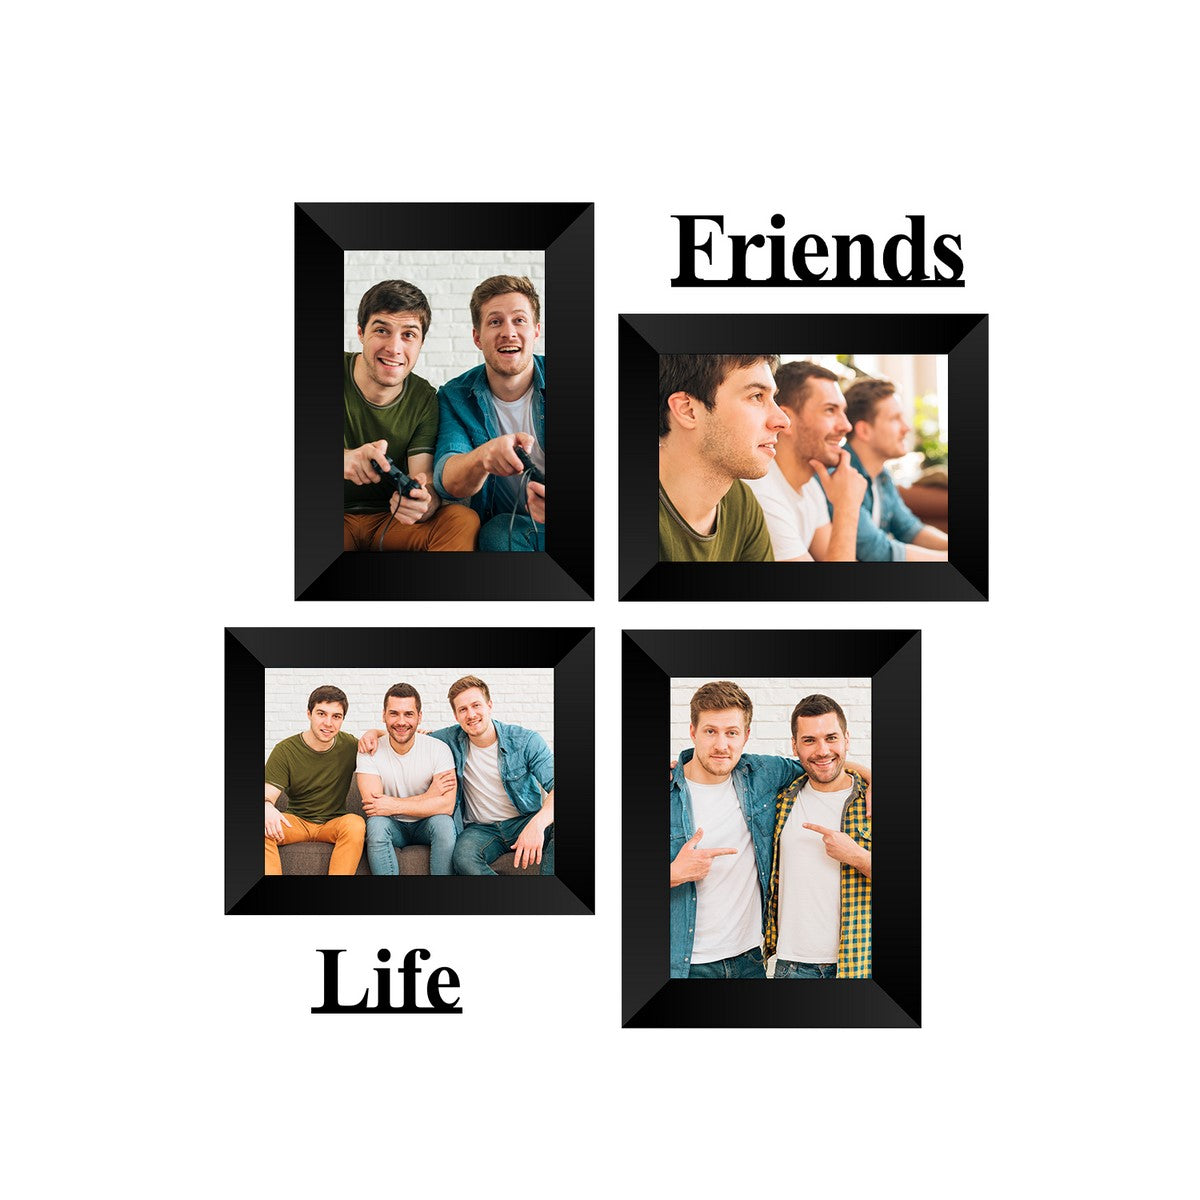 Memory Wall Collage Photo Frame - Set of 4 Photo Frames for 2 Photos of 5"x7", 2 Photos of 4"x6", 1 Piece of FRIENDS, 1 Piece of LIFE